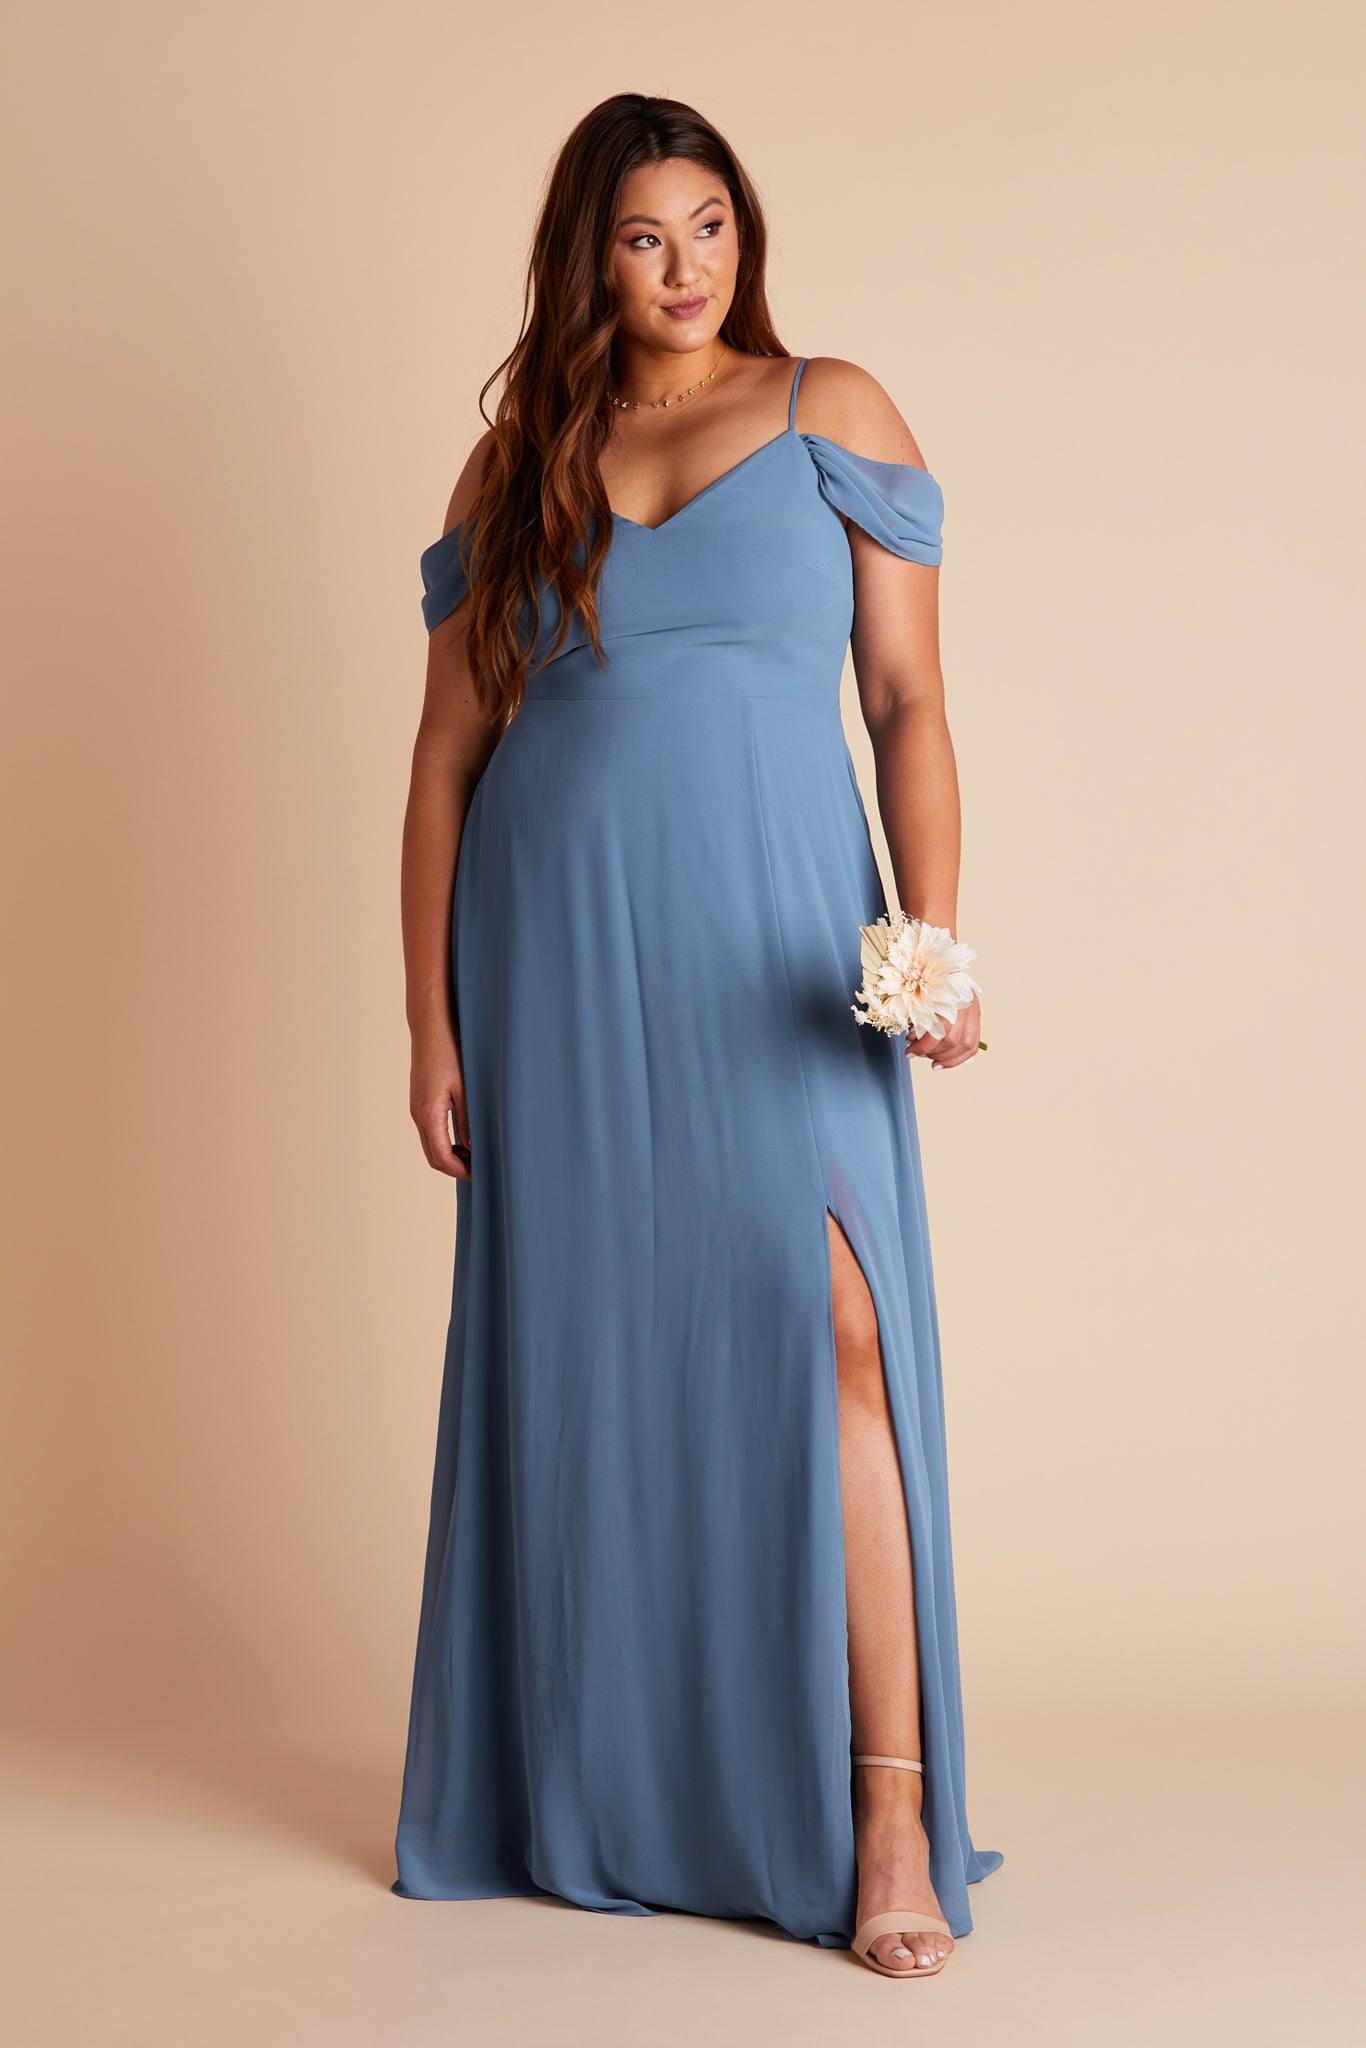 Devin convertible plus size bridesmaids dress with slit in twilight blue chiffon by Birdy Grey, front view